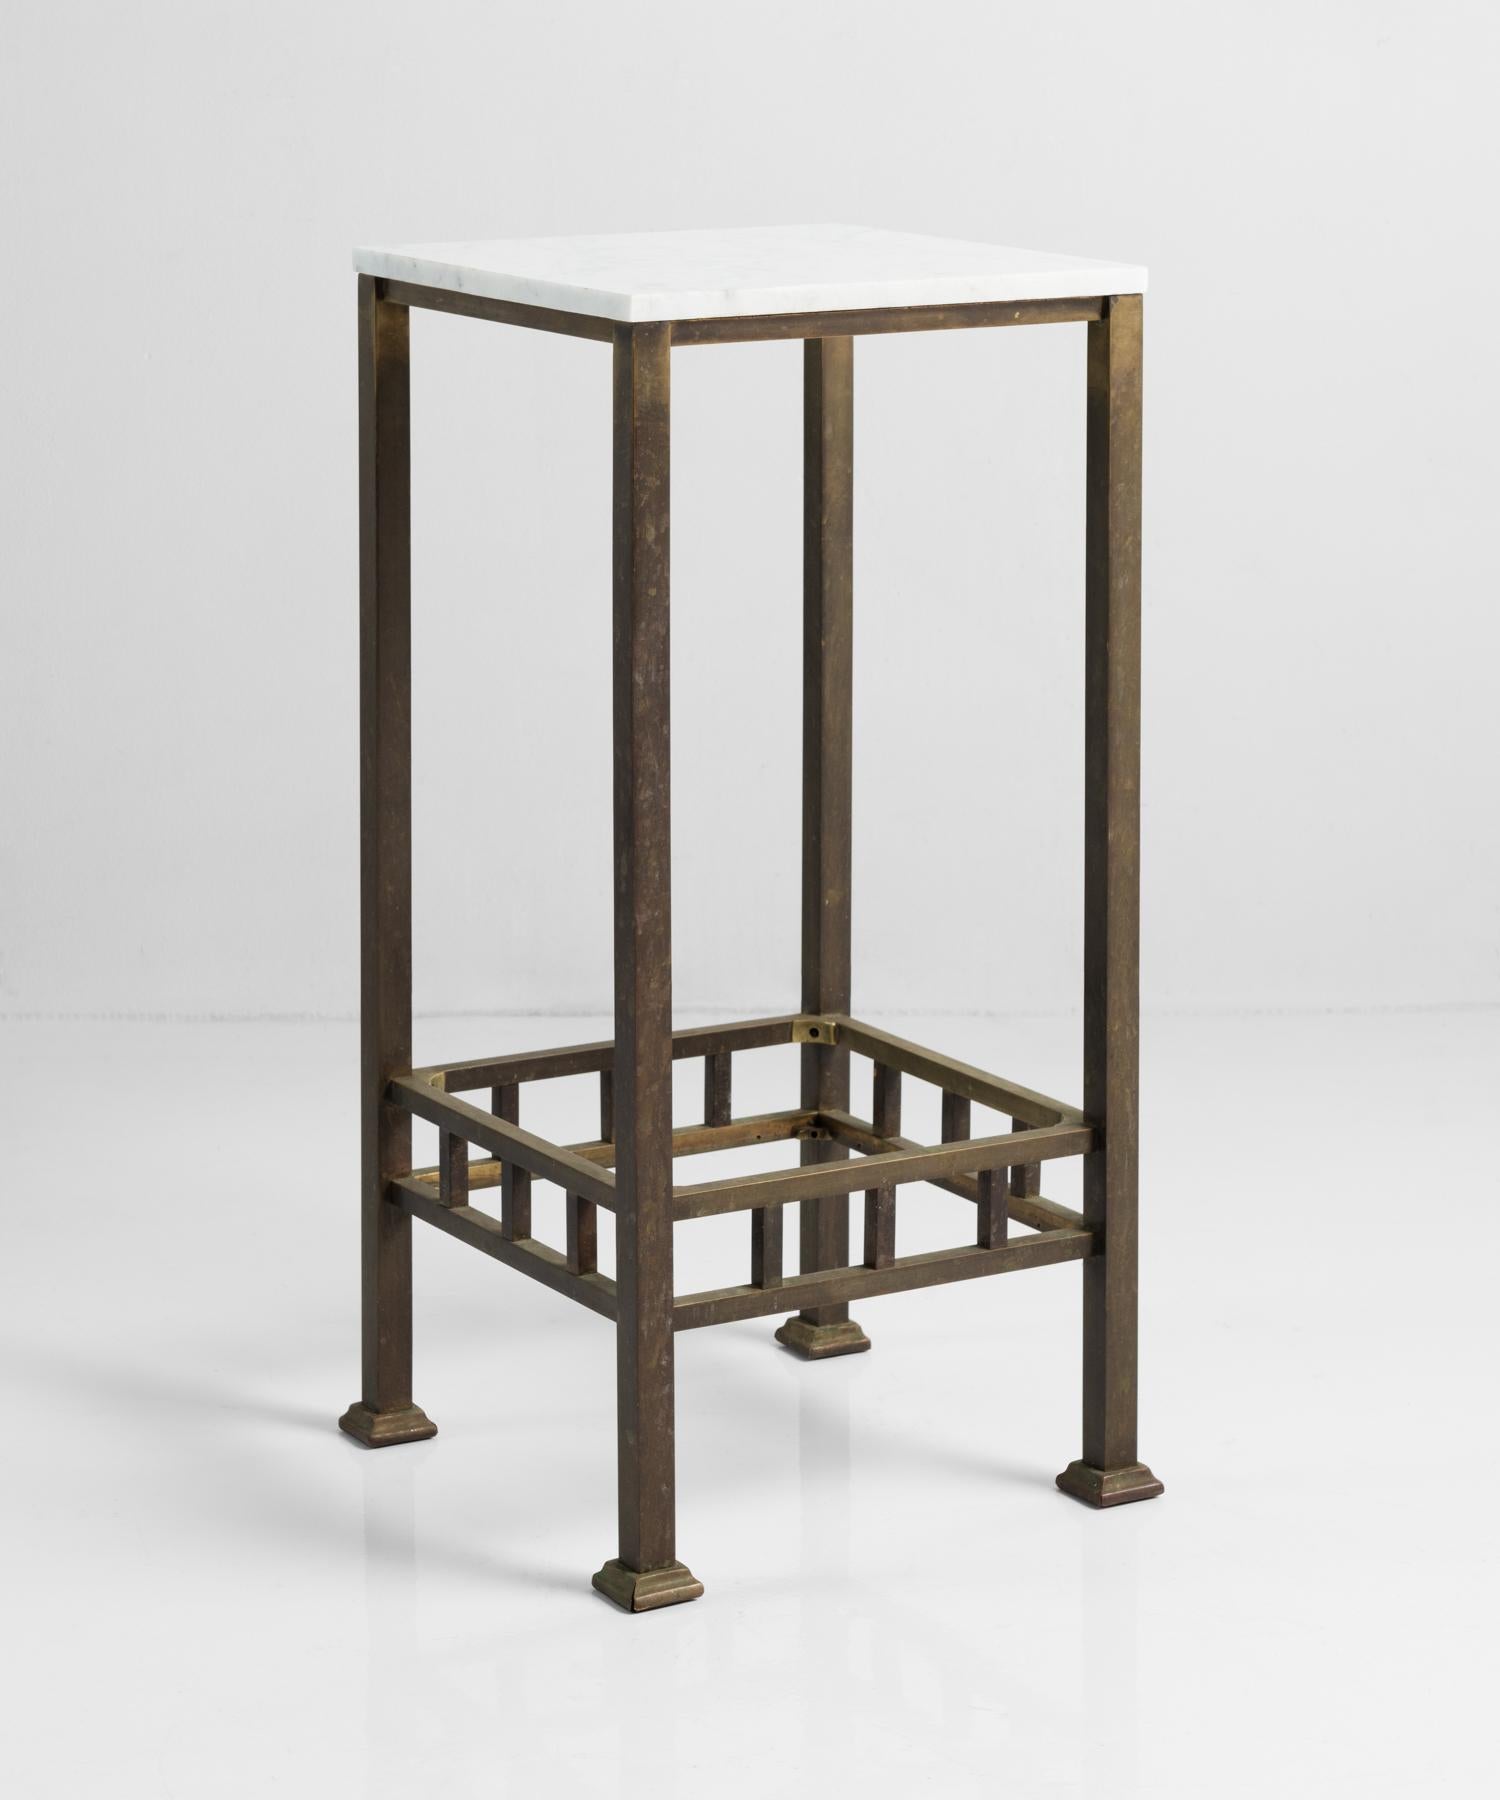 Brass and marble side table, England, circa 1940.

Simple form with brass structure and Carrara marble top.